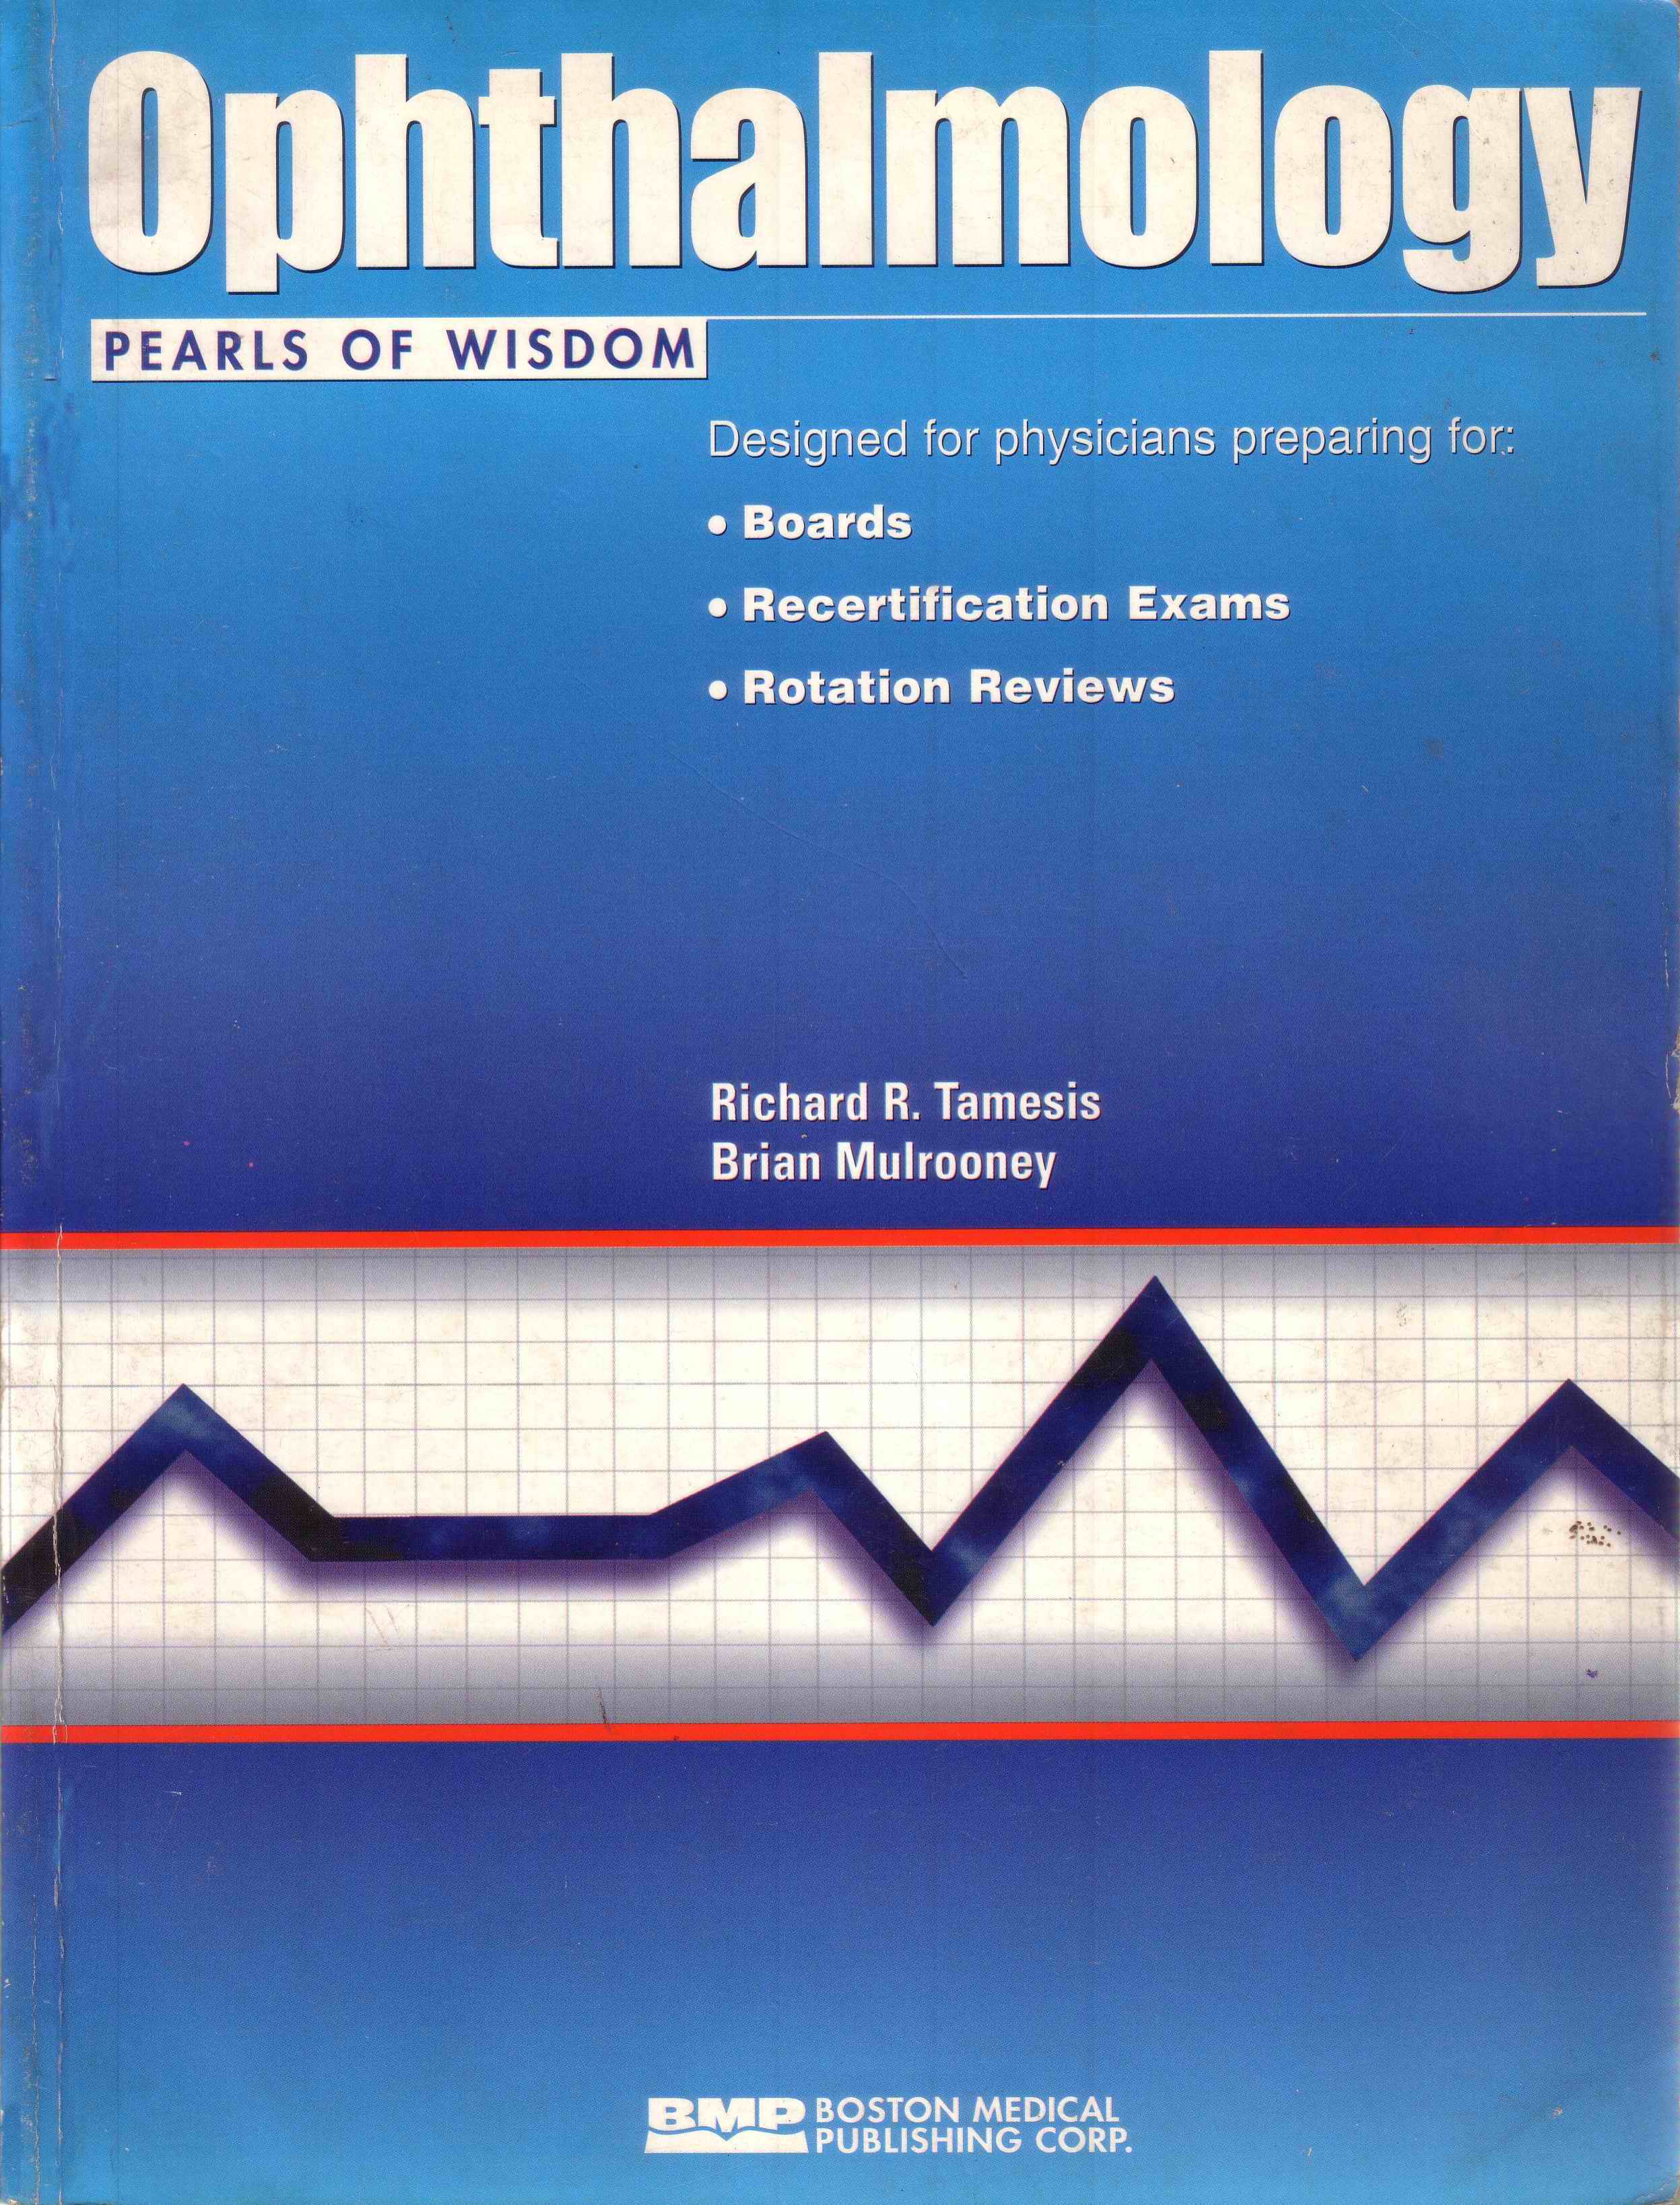 Ophthalmology Pearls of Wisdom, 1st Edition by Richard R. Tamesis and Brian Mulrooney